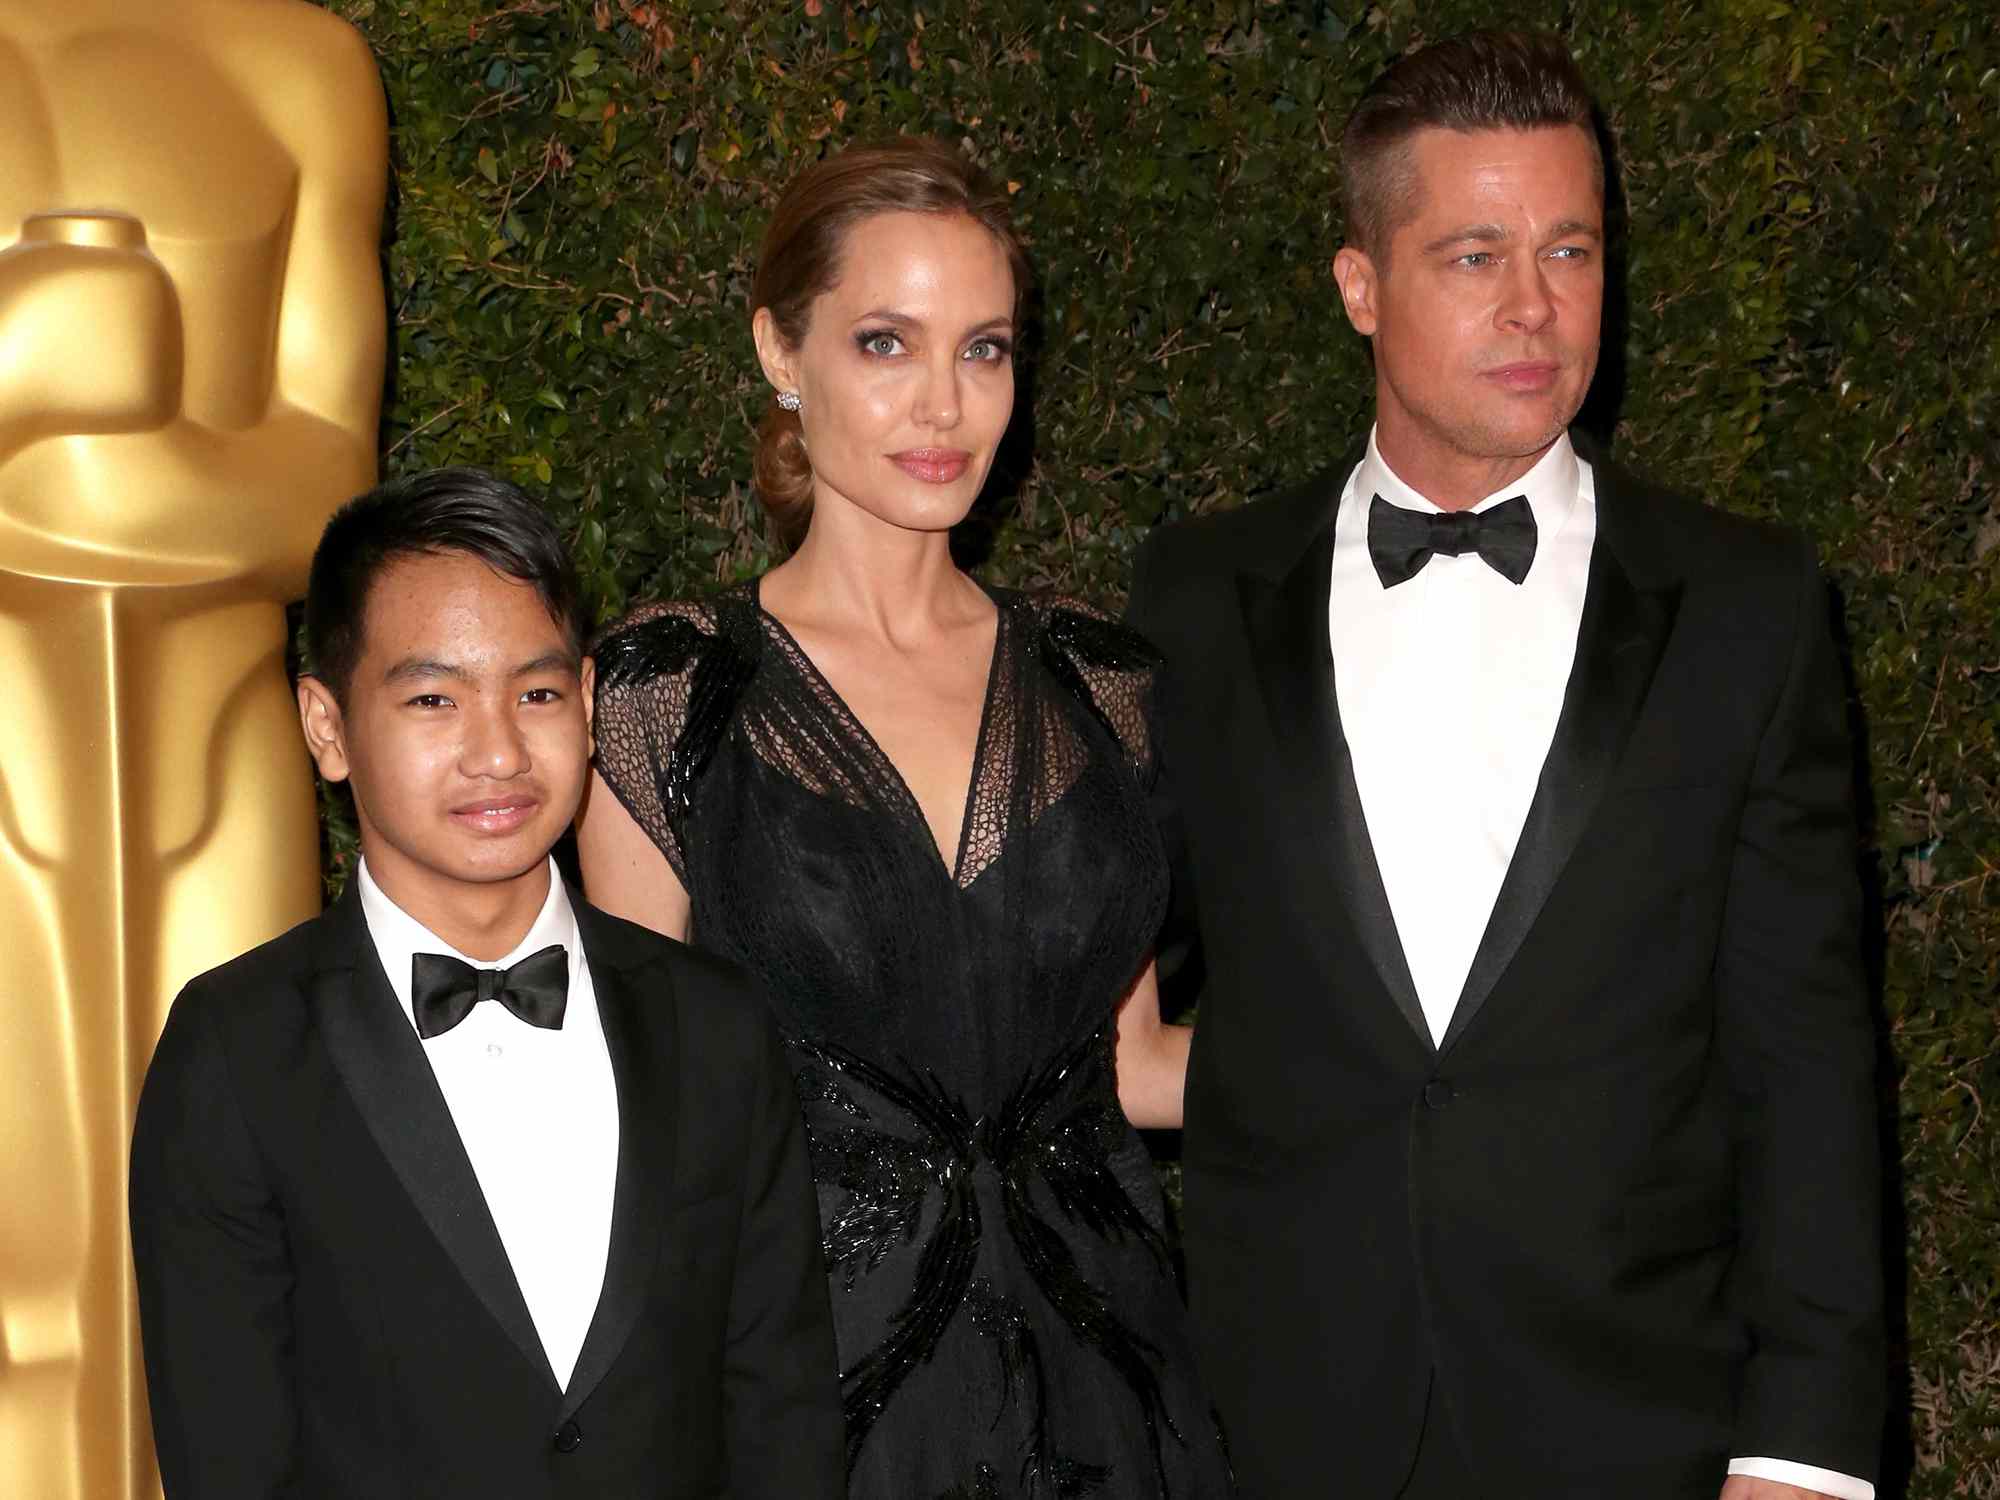 All About Maddox Jolie-Pitt, Angelina Jolie and Brad Pitt's Oldest Son